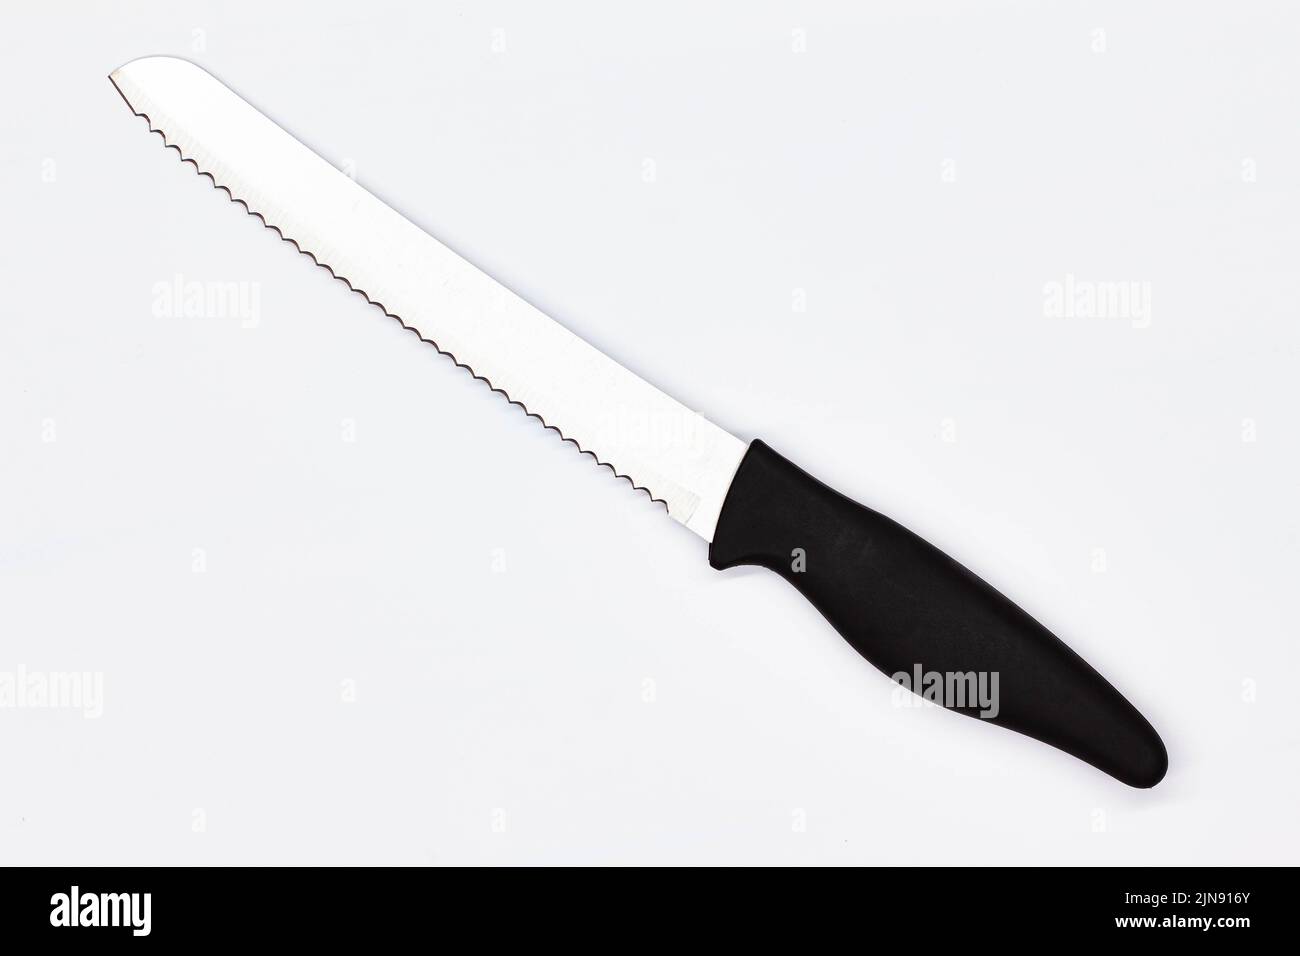 https://c8.alamy.com/comp/2JN916Y/kitchen-knife-for-bread-on-white-background-chef-butchers-knife-for-cutting-bread-knife-for-cutting-bakery-products-kitchenware-professional-food-2JN916Y.jpg